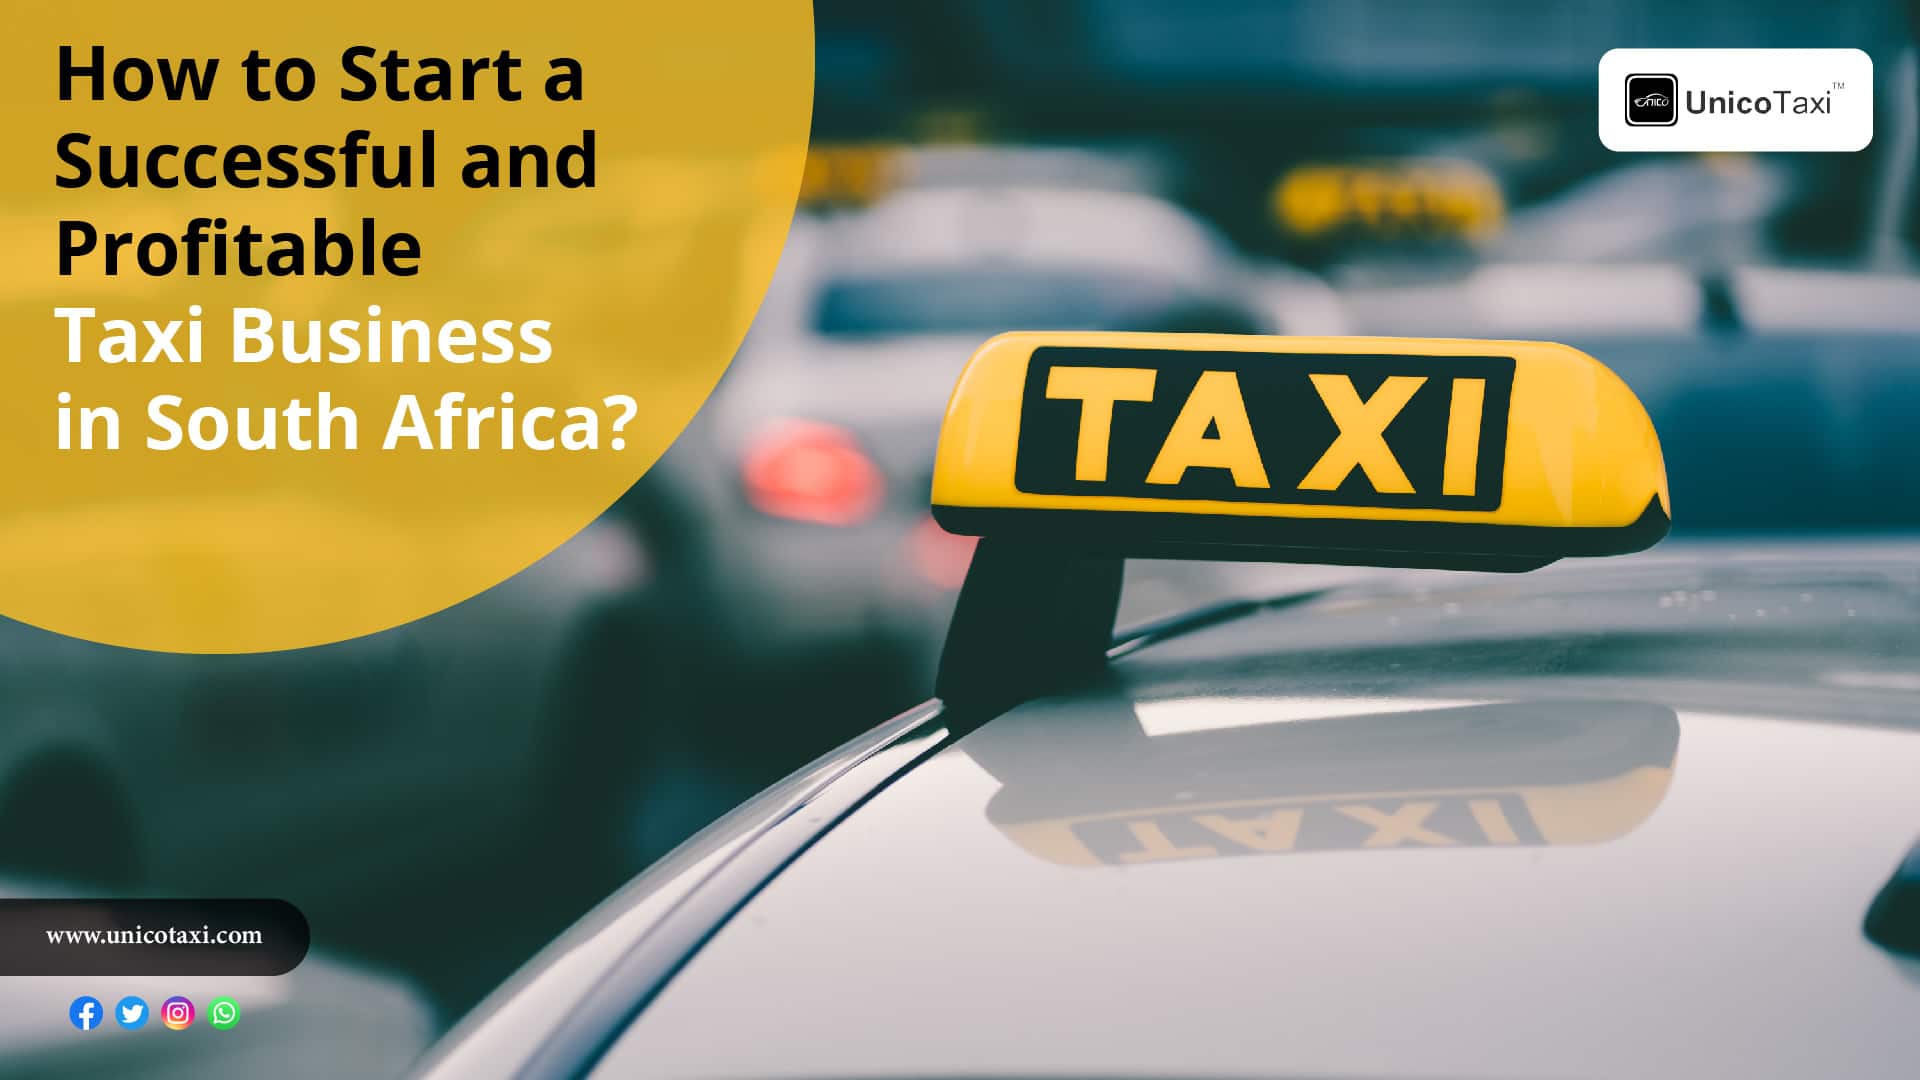 How to Start a Successful and Profitable Taxi Business in South Africa?